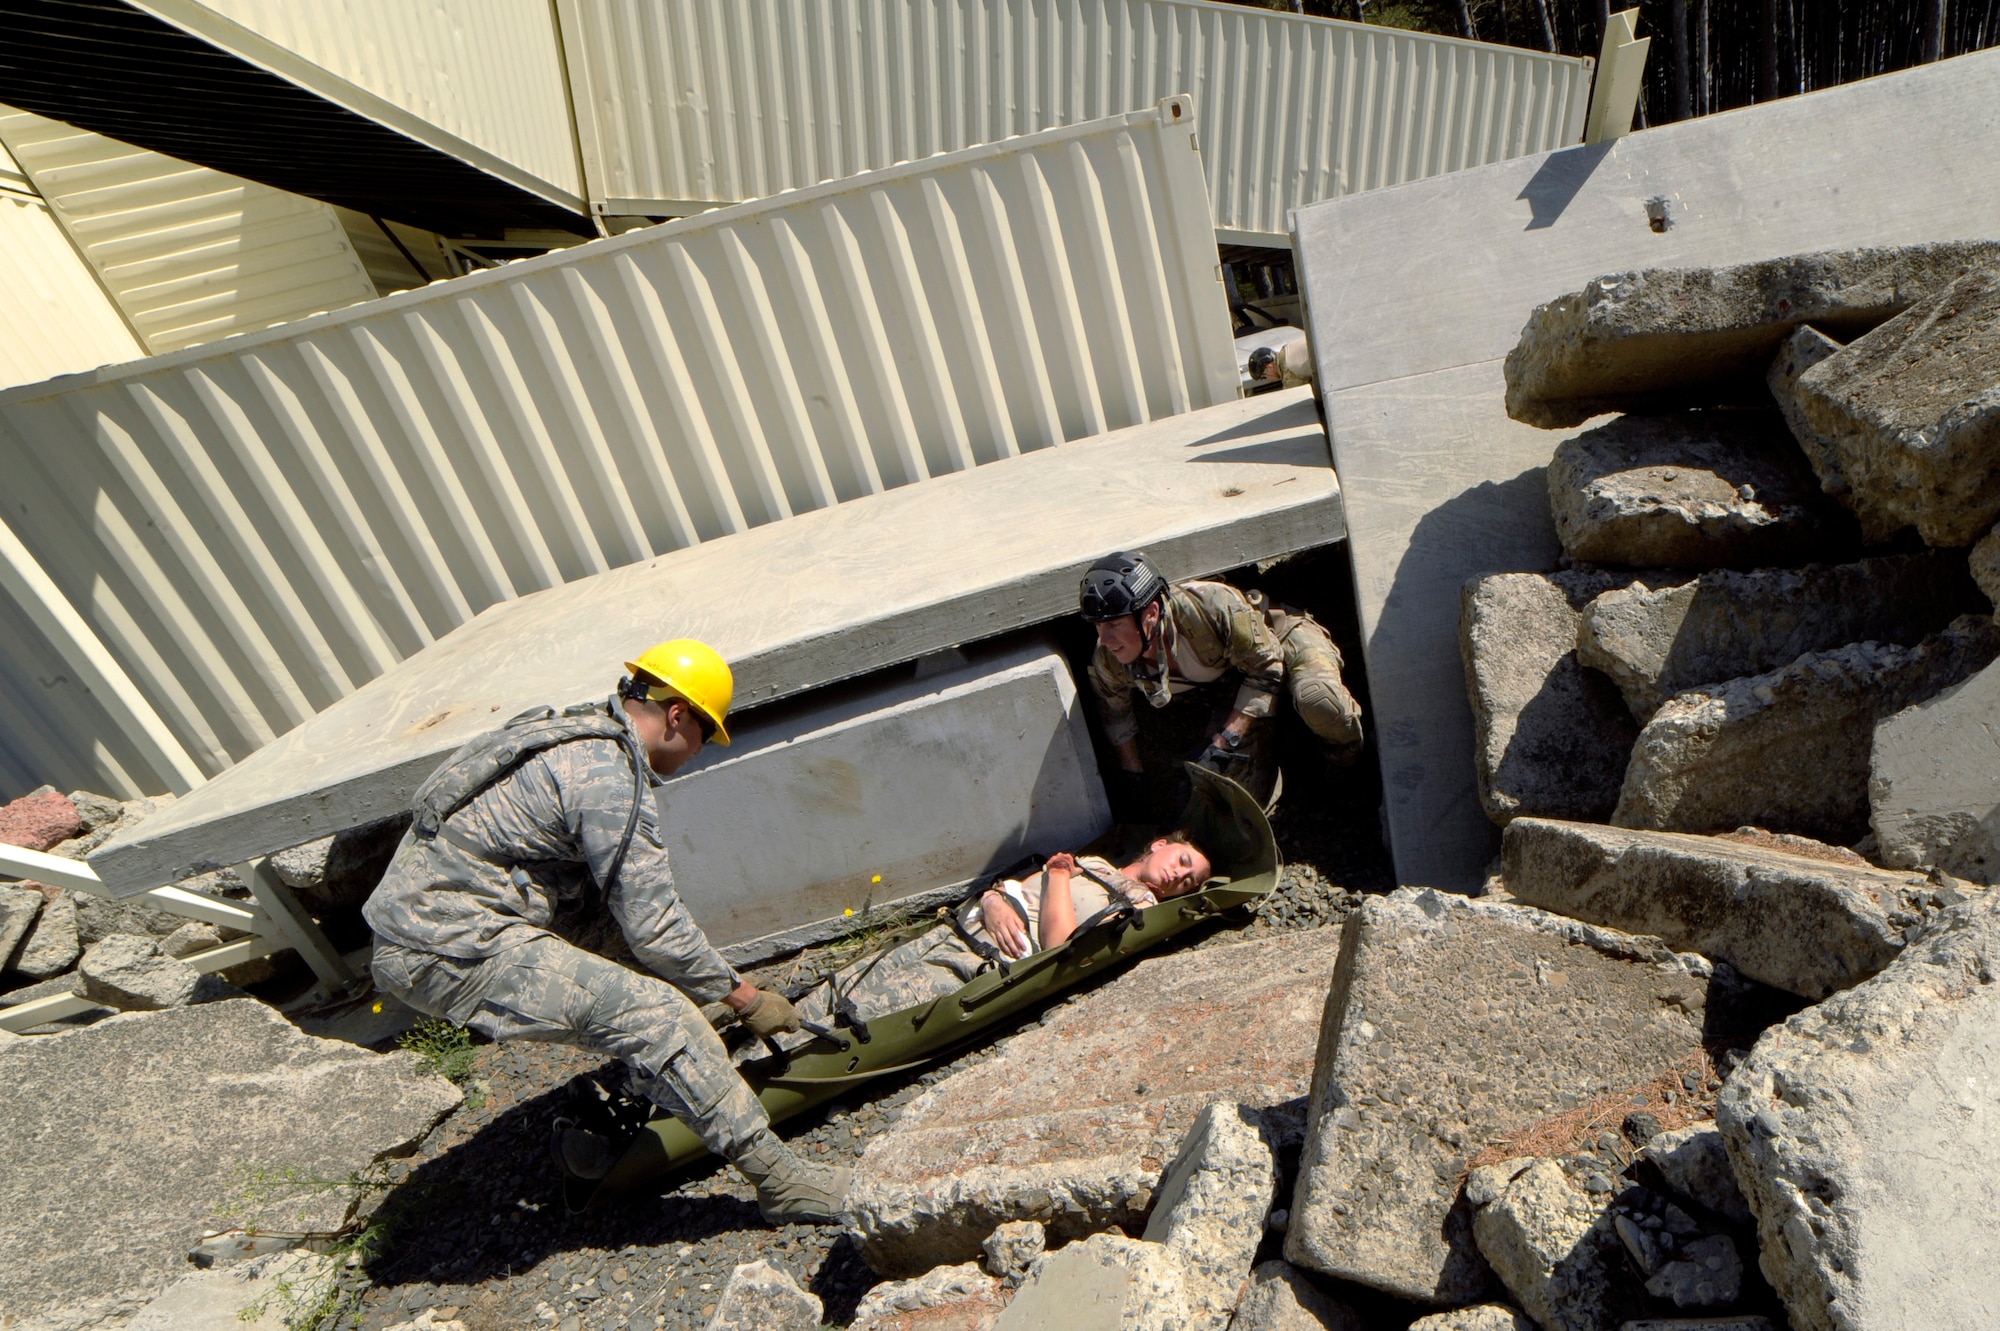 First responders assist a survivor out of a simulated damaged structure during Pathfinder-Minutemen Exercise, Aug. 5, 2015 at Camp Rilea in Warrenton, Ore. The annual event is a joint multi-agency, multi-state disaster preparedness exercise based on response to a possible Cascadia Subduction Zone event. Officials believe the Northwest is overdue for a magnitude 7.0 or greater earthquake. (U.S. Air National Guard photo by Tech. Sgt. John Hughel, 142nd Fighter Wing Public Affairs/Released)
